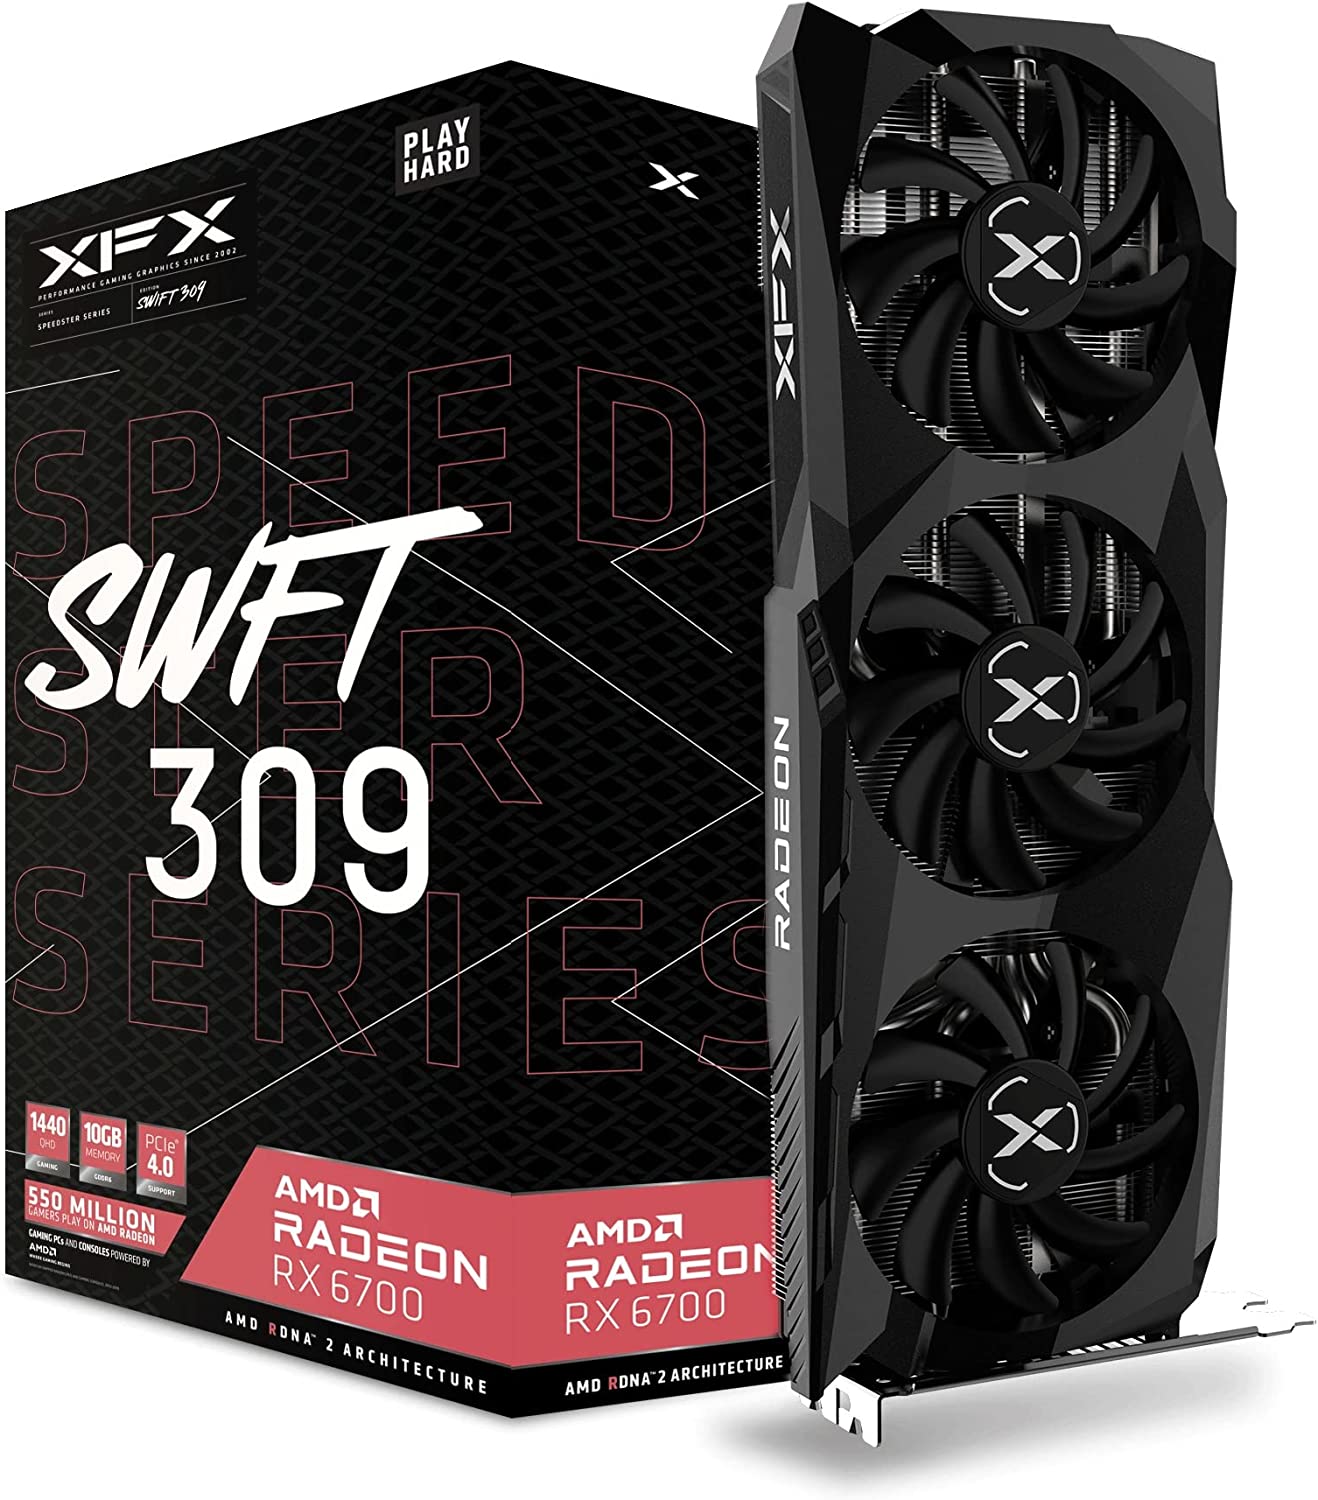 XFX SPEEDSTER SWFT309 AMD Radeon RX 6700 CORE Gaming Graphics Card (RX-67XLKWFDV) $321 + Free Ship